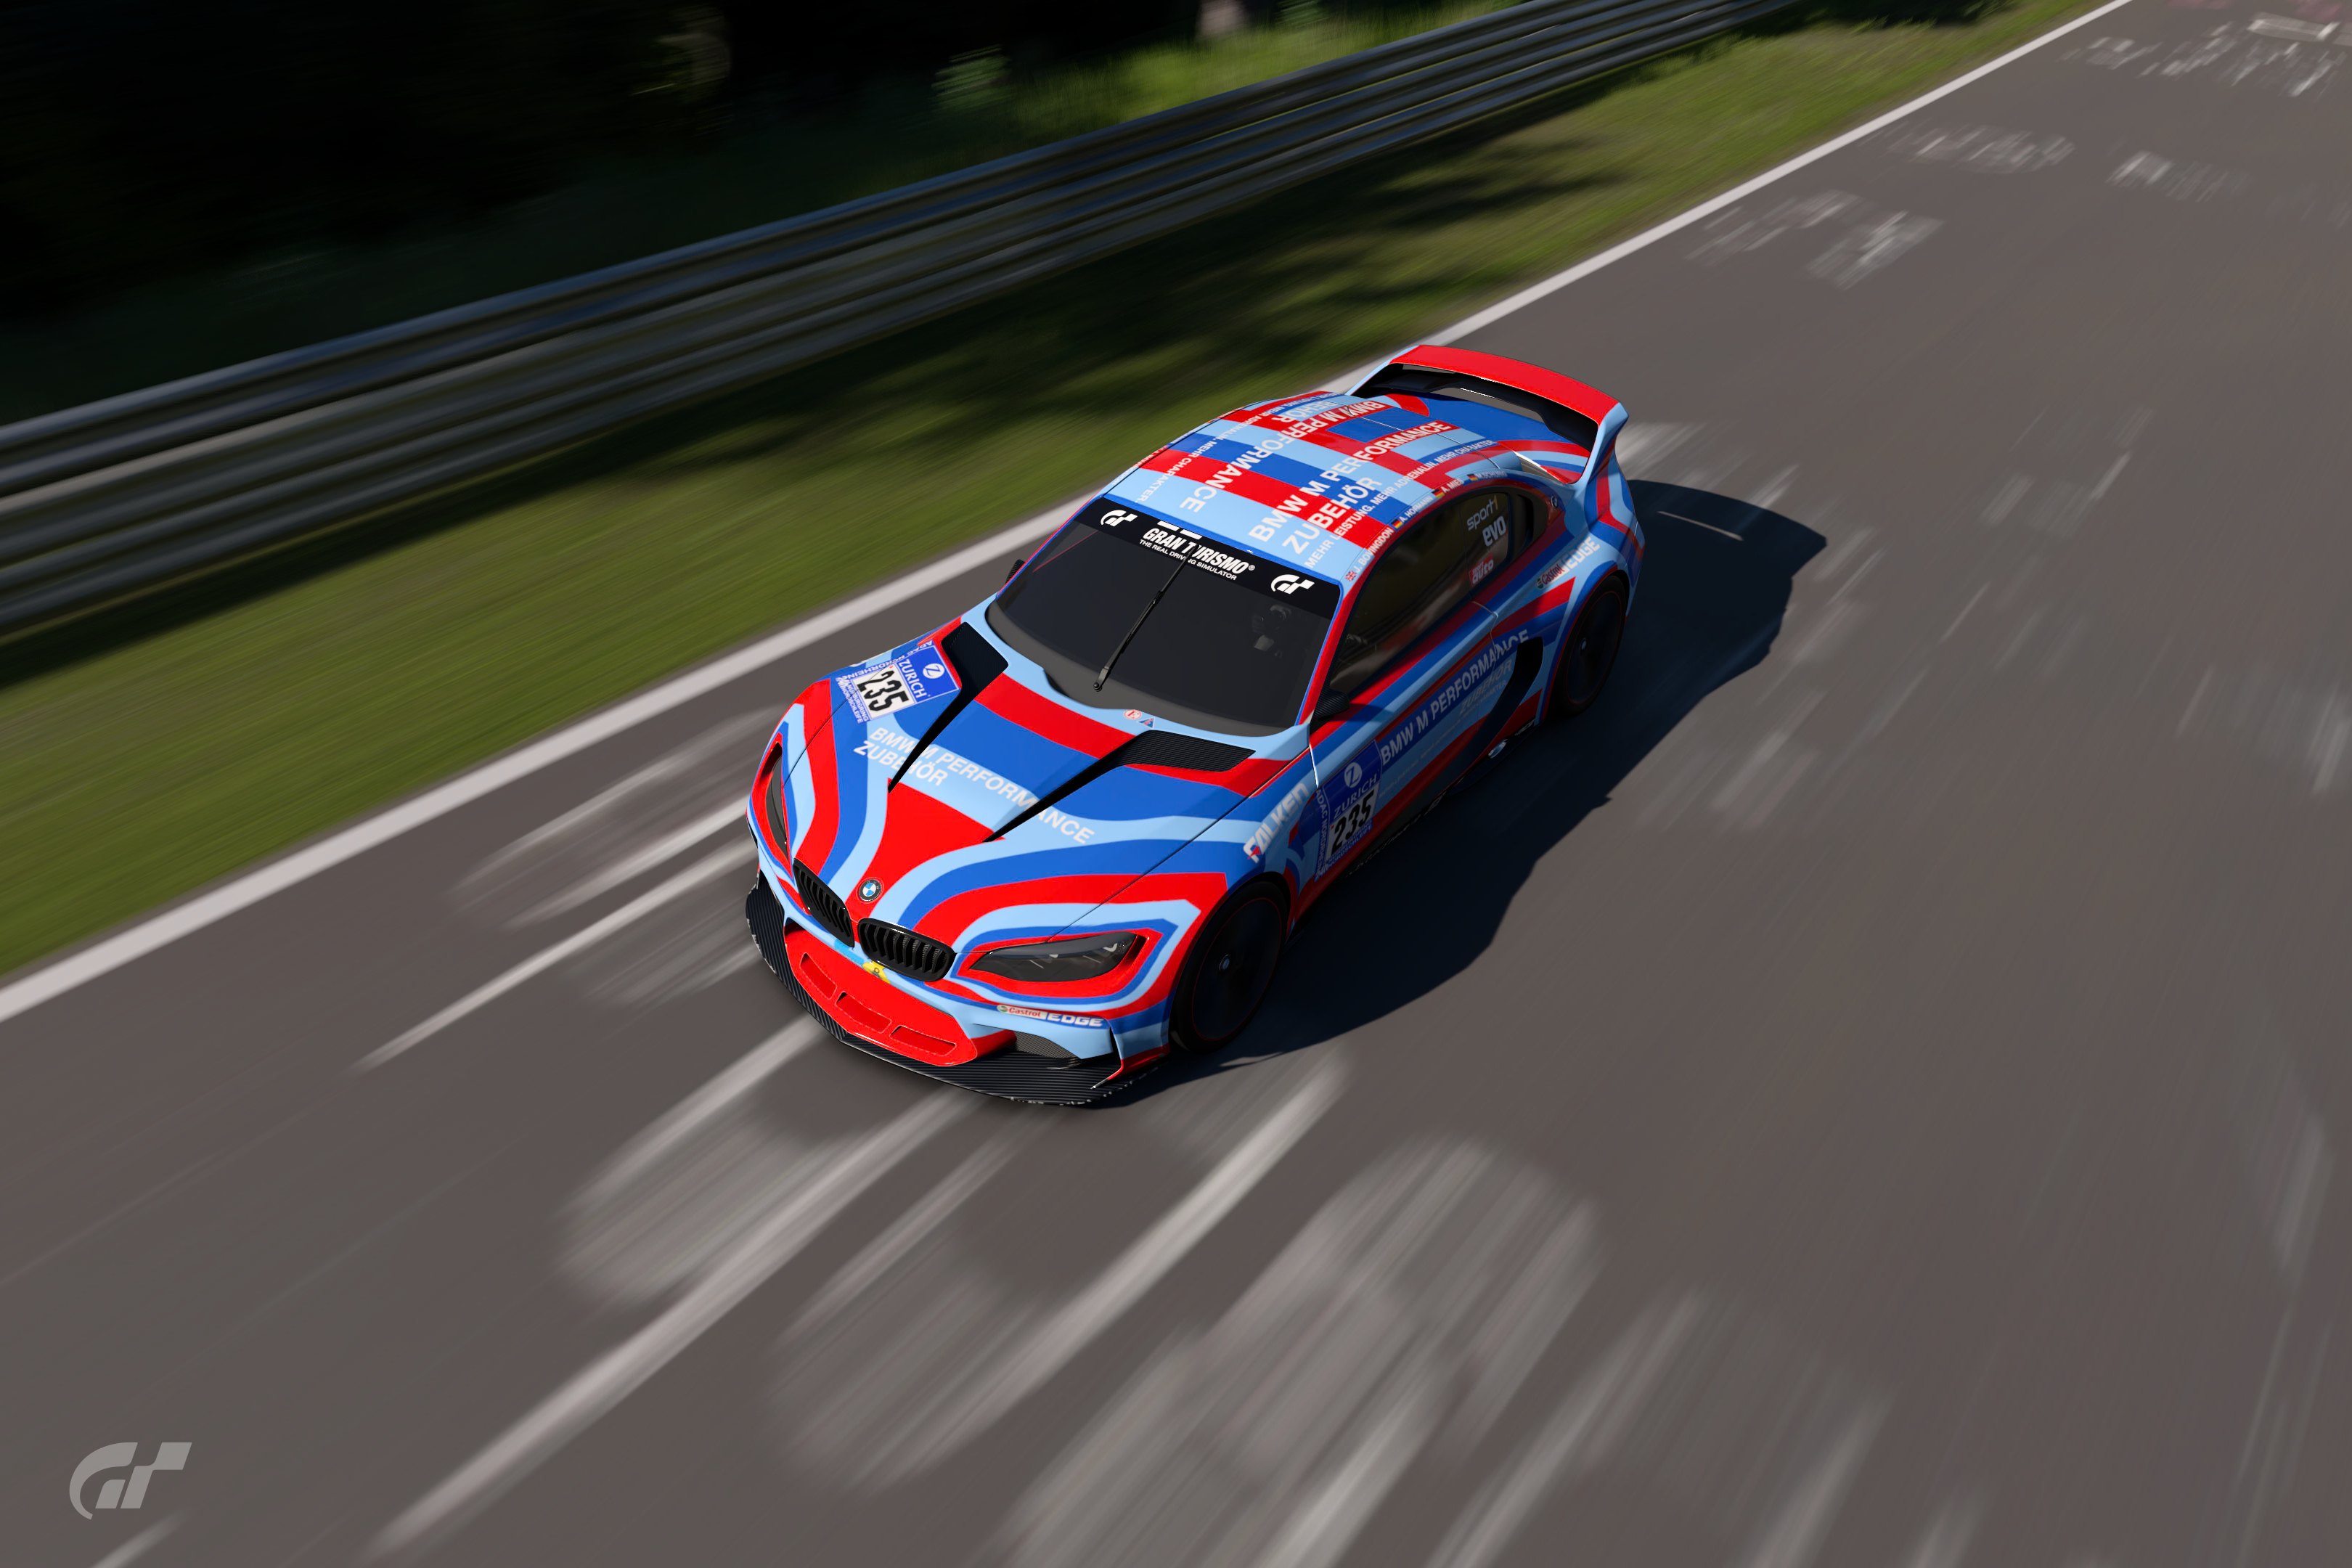 2014 24h class winning livery. Adapted from a M235i.  4